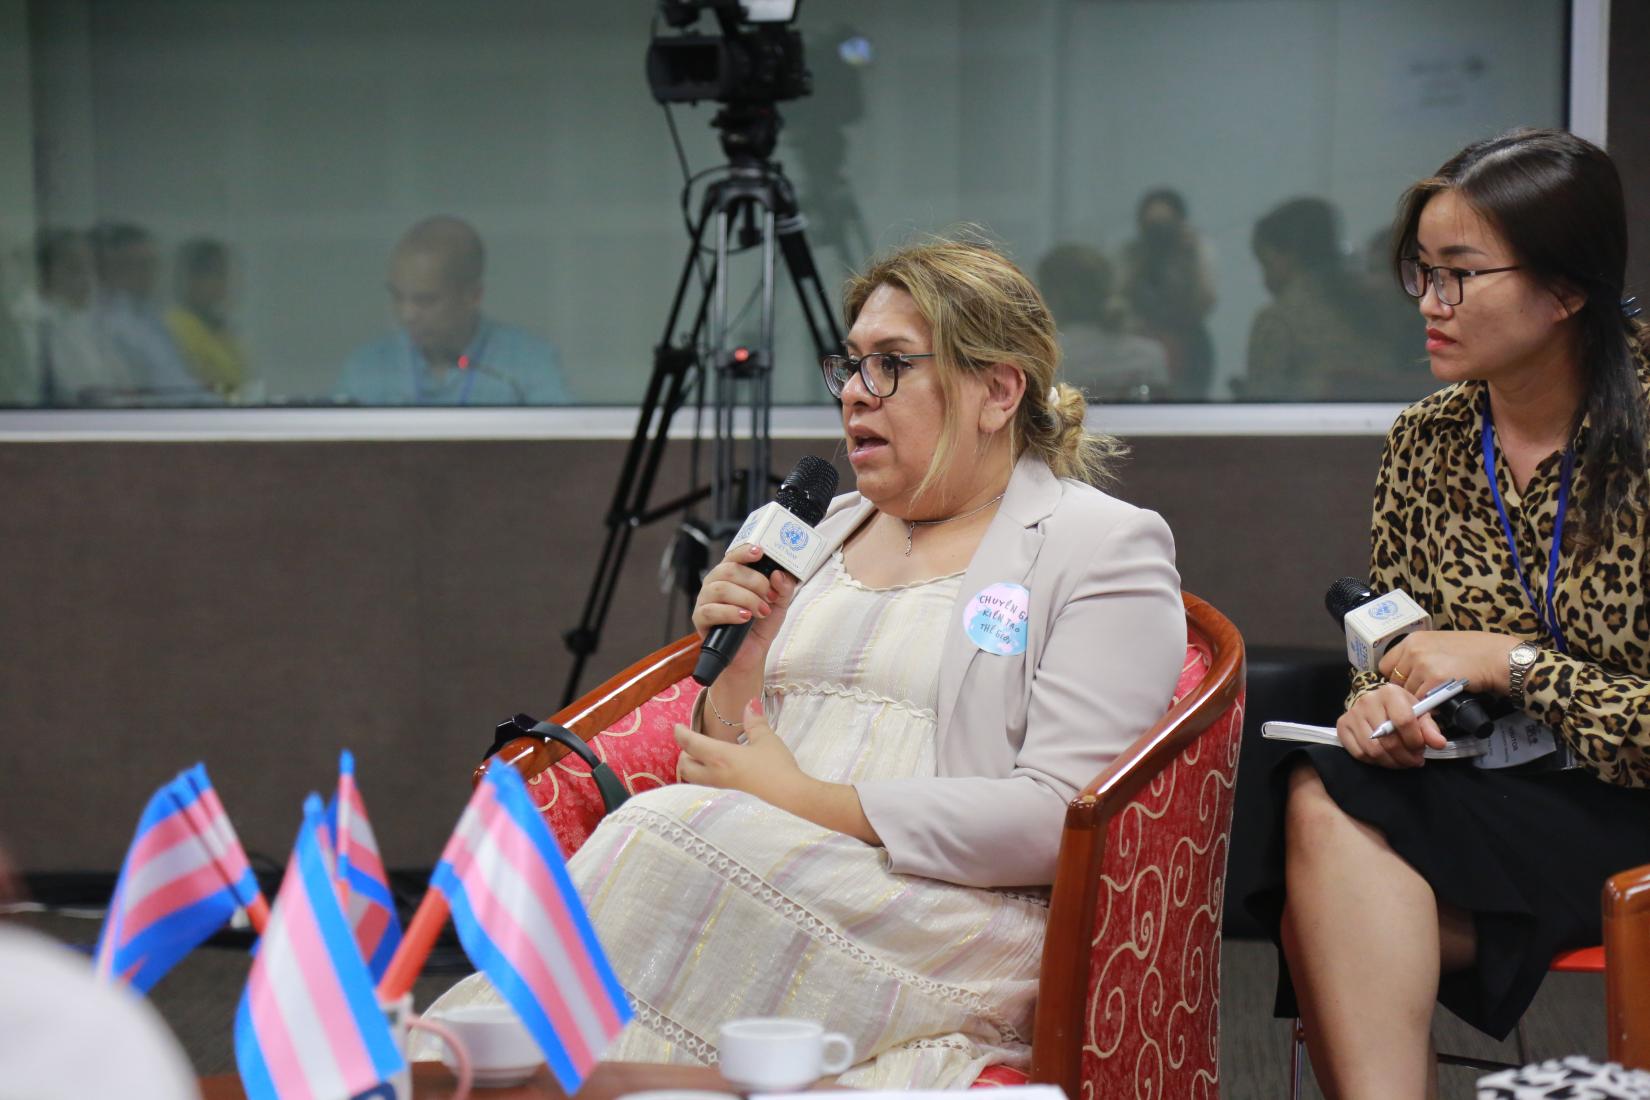 Ms. Alba Rueda, Argentina's Special Envoy for Sexual Orientation and Gender Identity